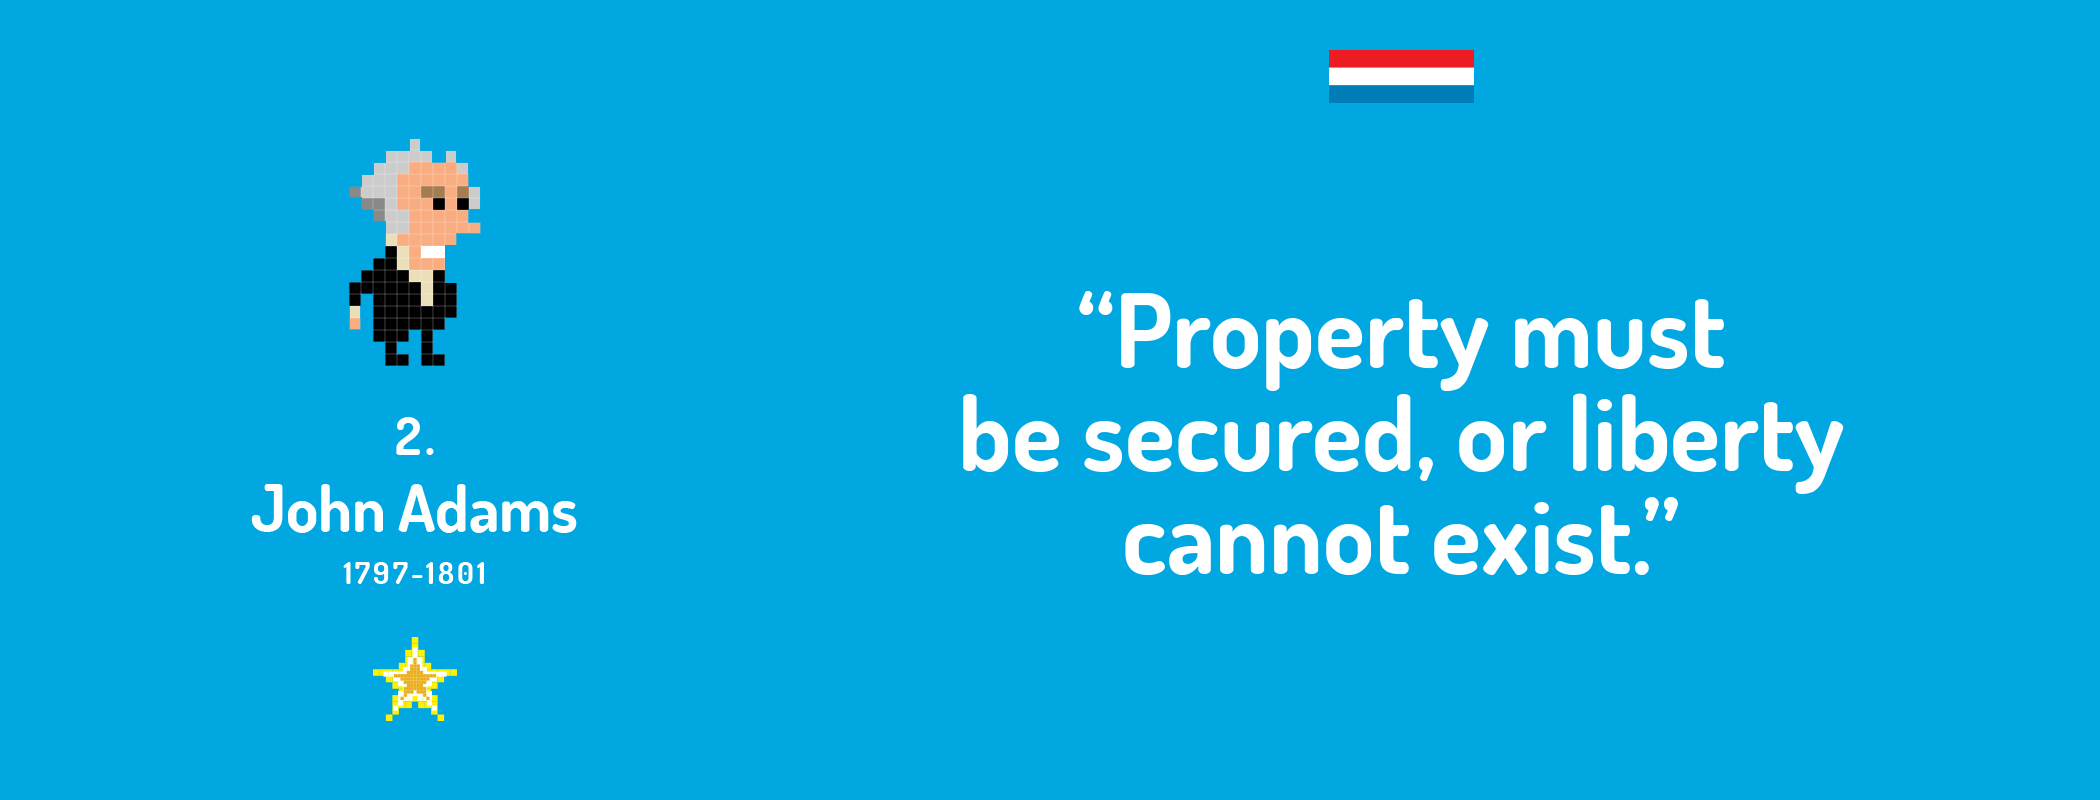 &quot;Property must be secured, or liberty cannot exist.&quot;